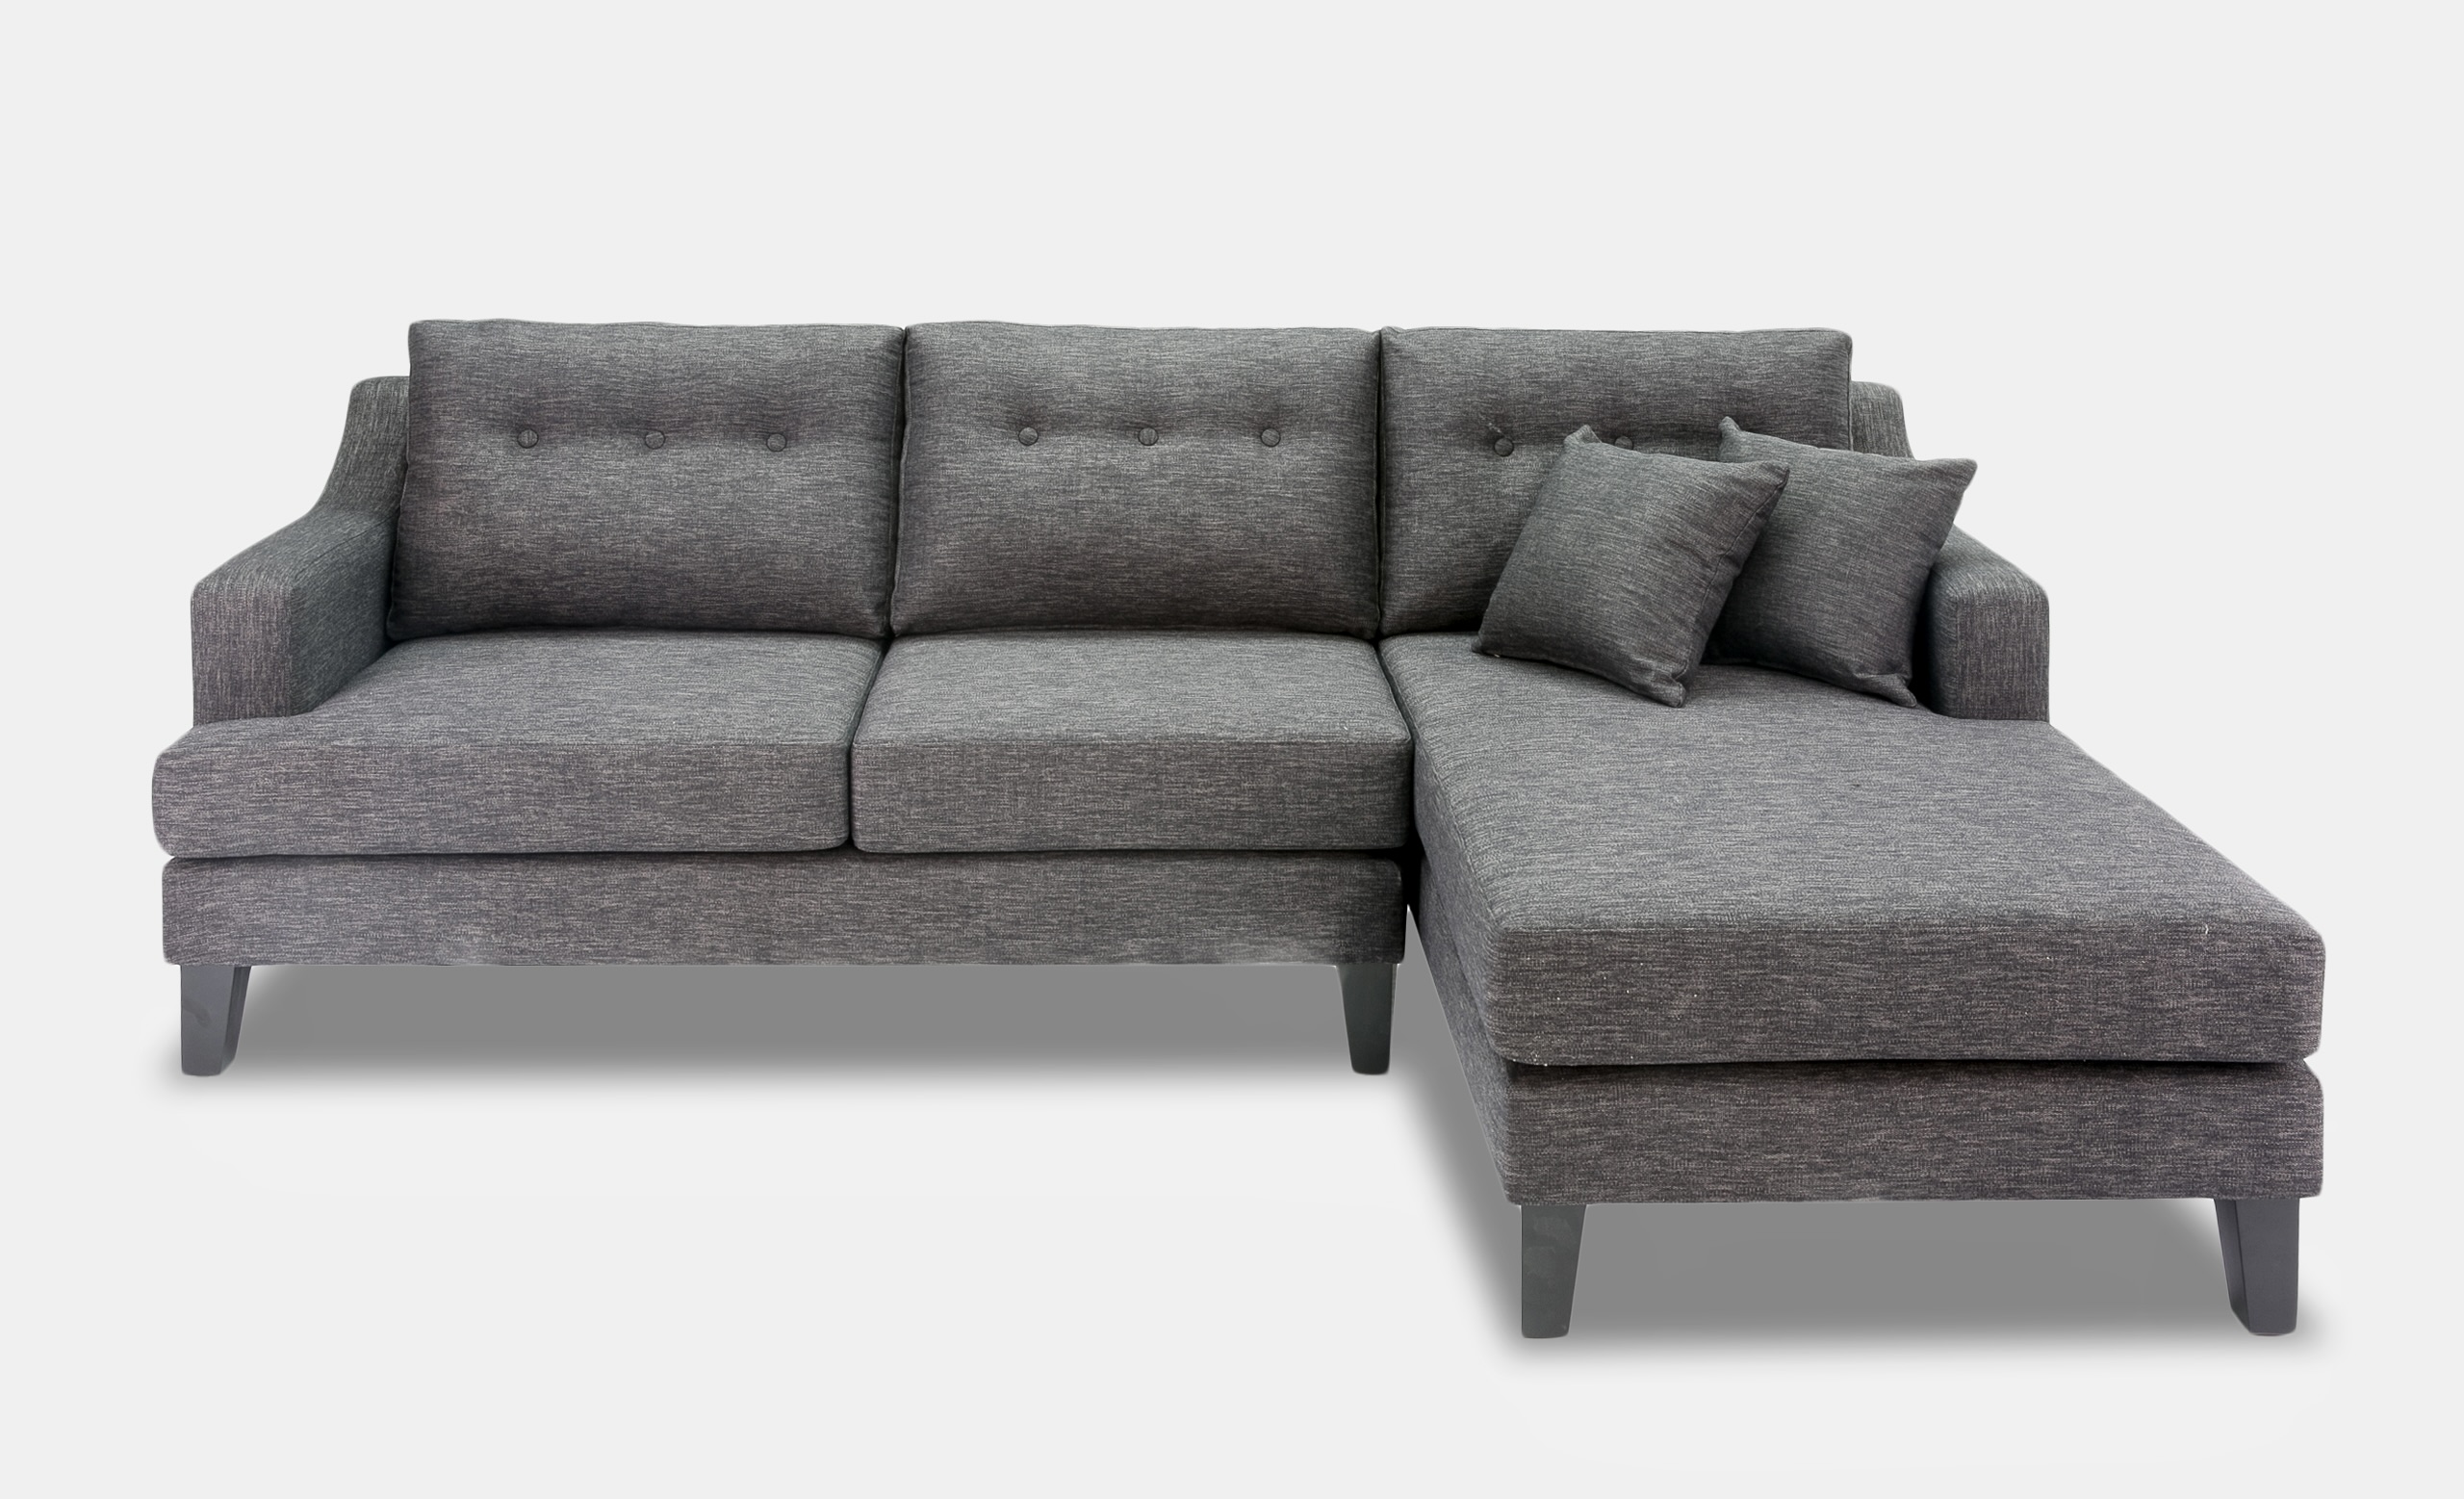 Lilyfield chaise lounge - buttoned (2)